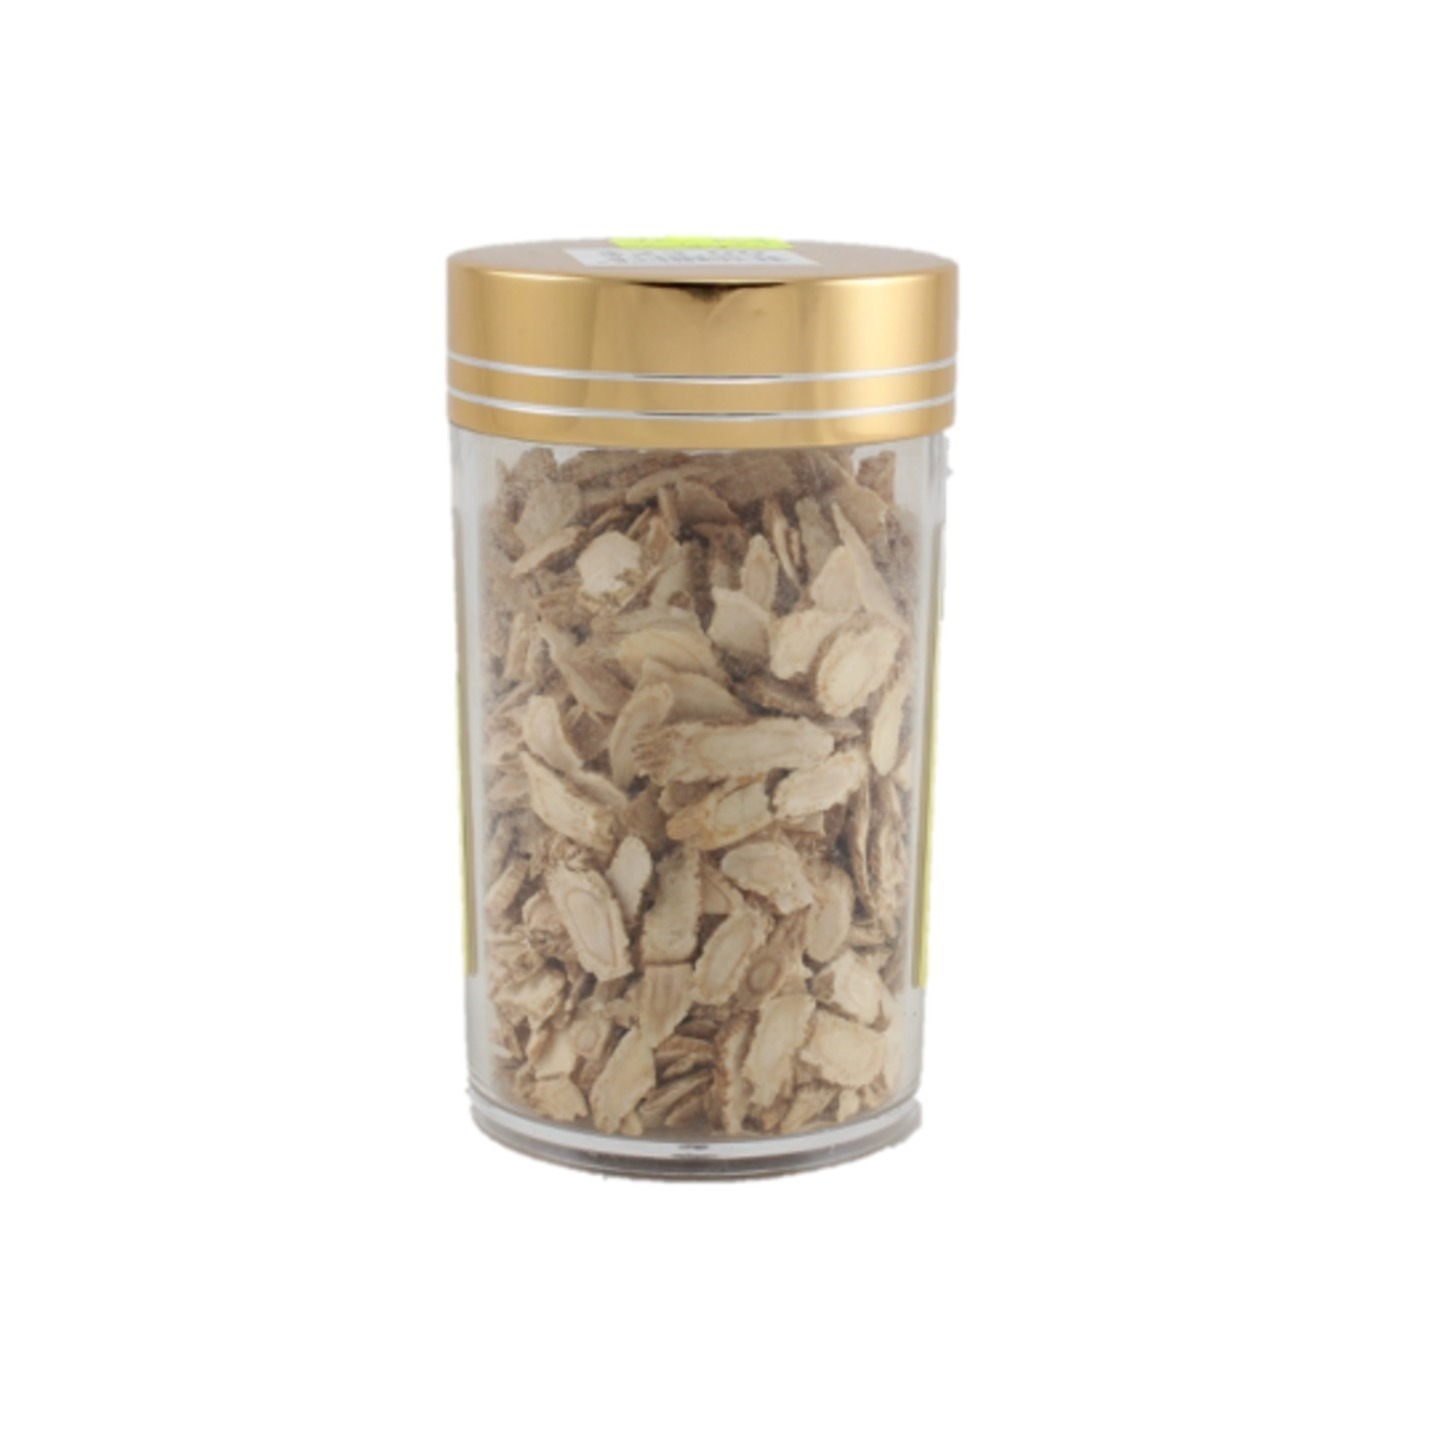 American Ginseng Slices 泡参片 100g PROMOTION FOR 2